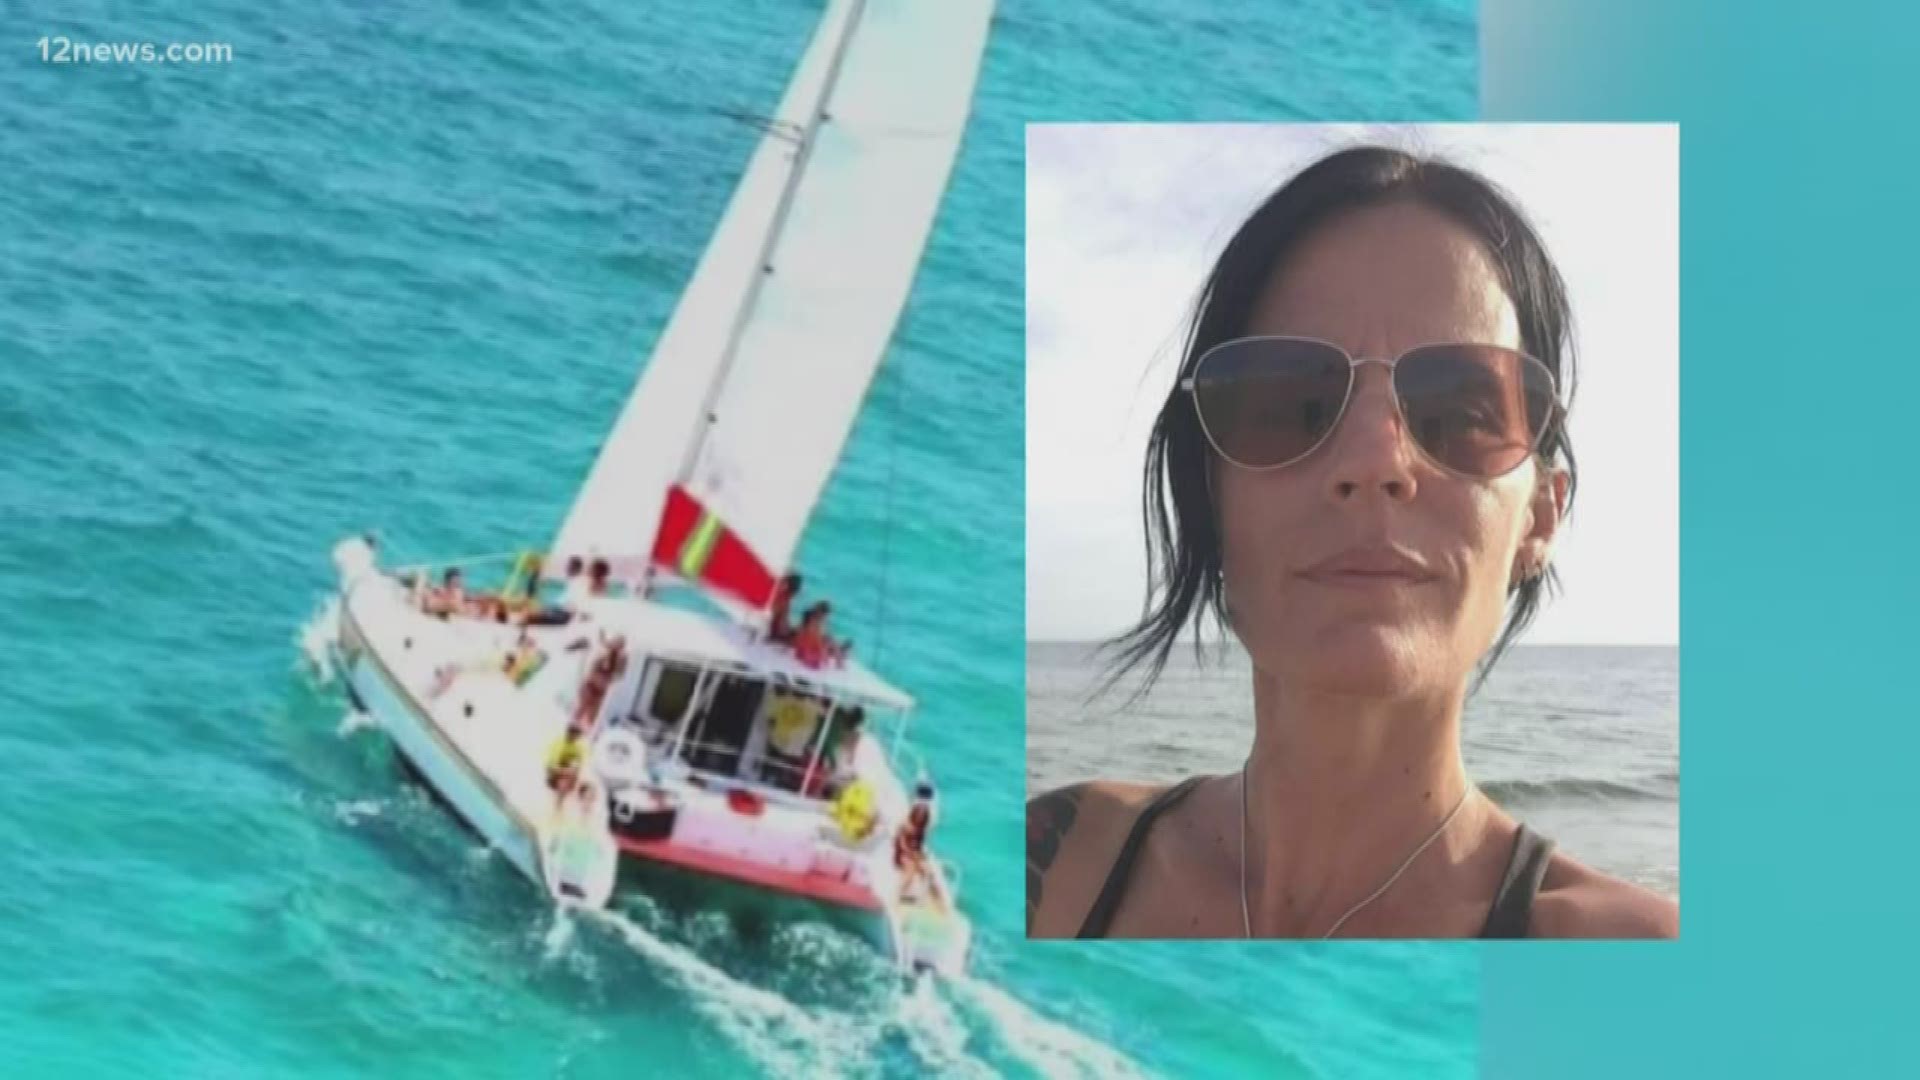 Alison Mackenzie and her boyfriend were supposed to be in Belize for 6 months. But in the middle of a 3-day cruise, she went missing. Family is searching for answers